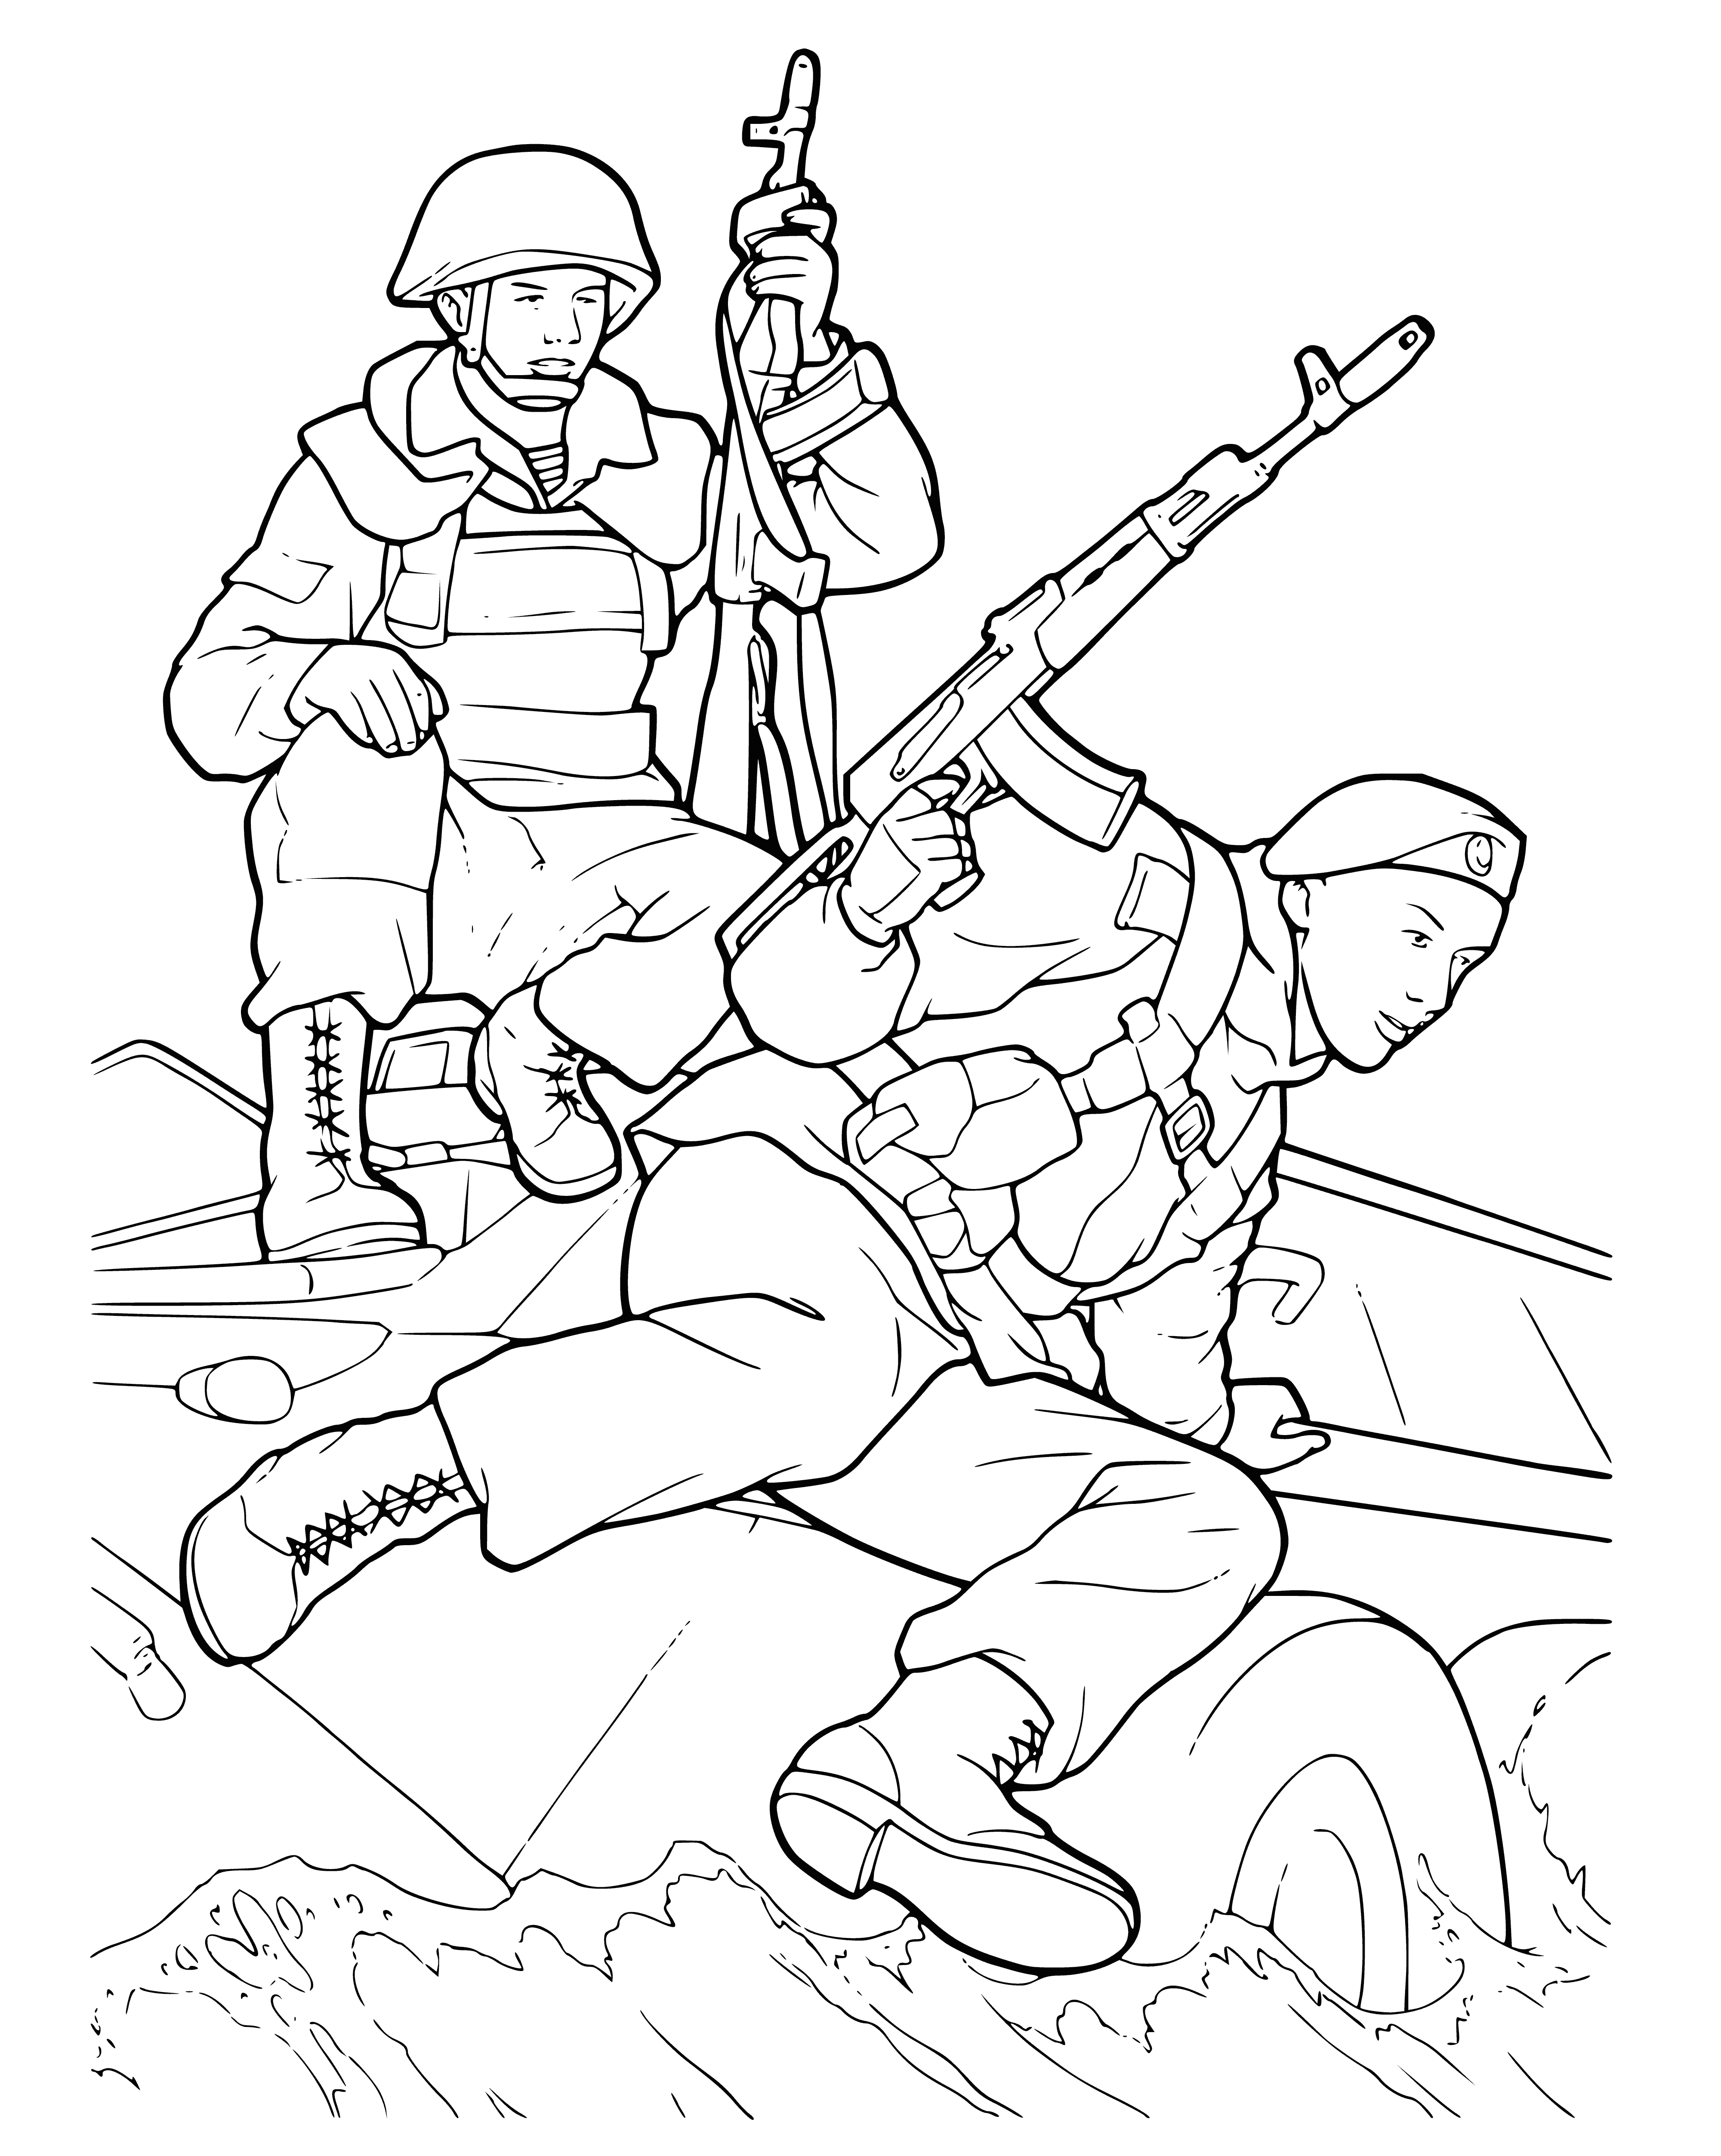 coloring page: Soldiers march in step on mission, carrying guns in uniforms, in coloring page.